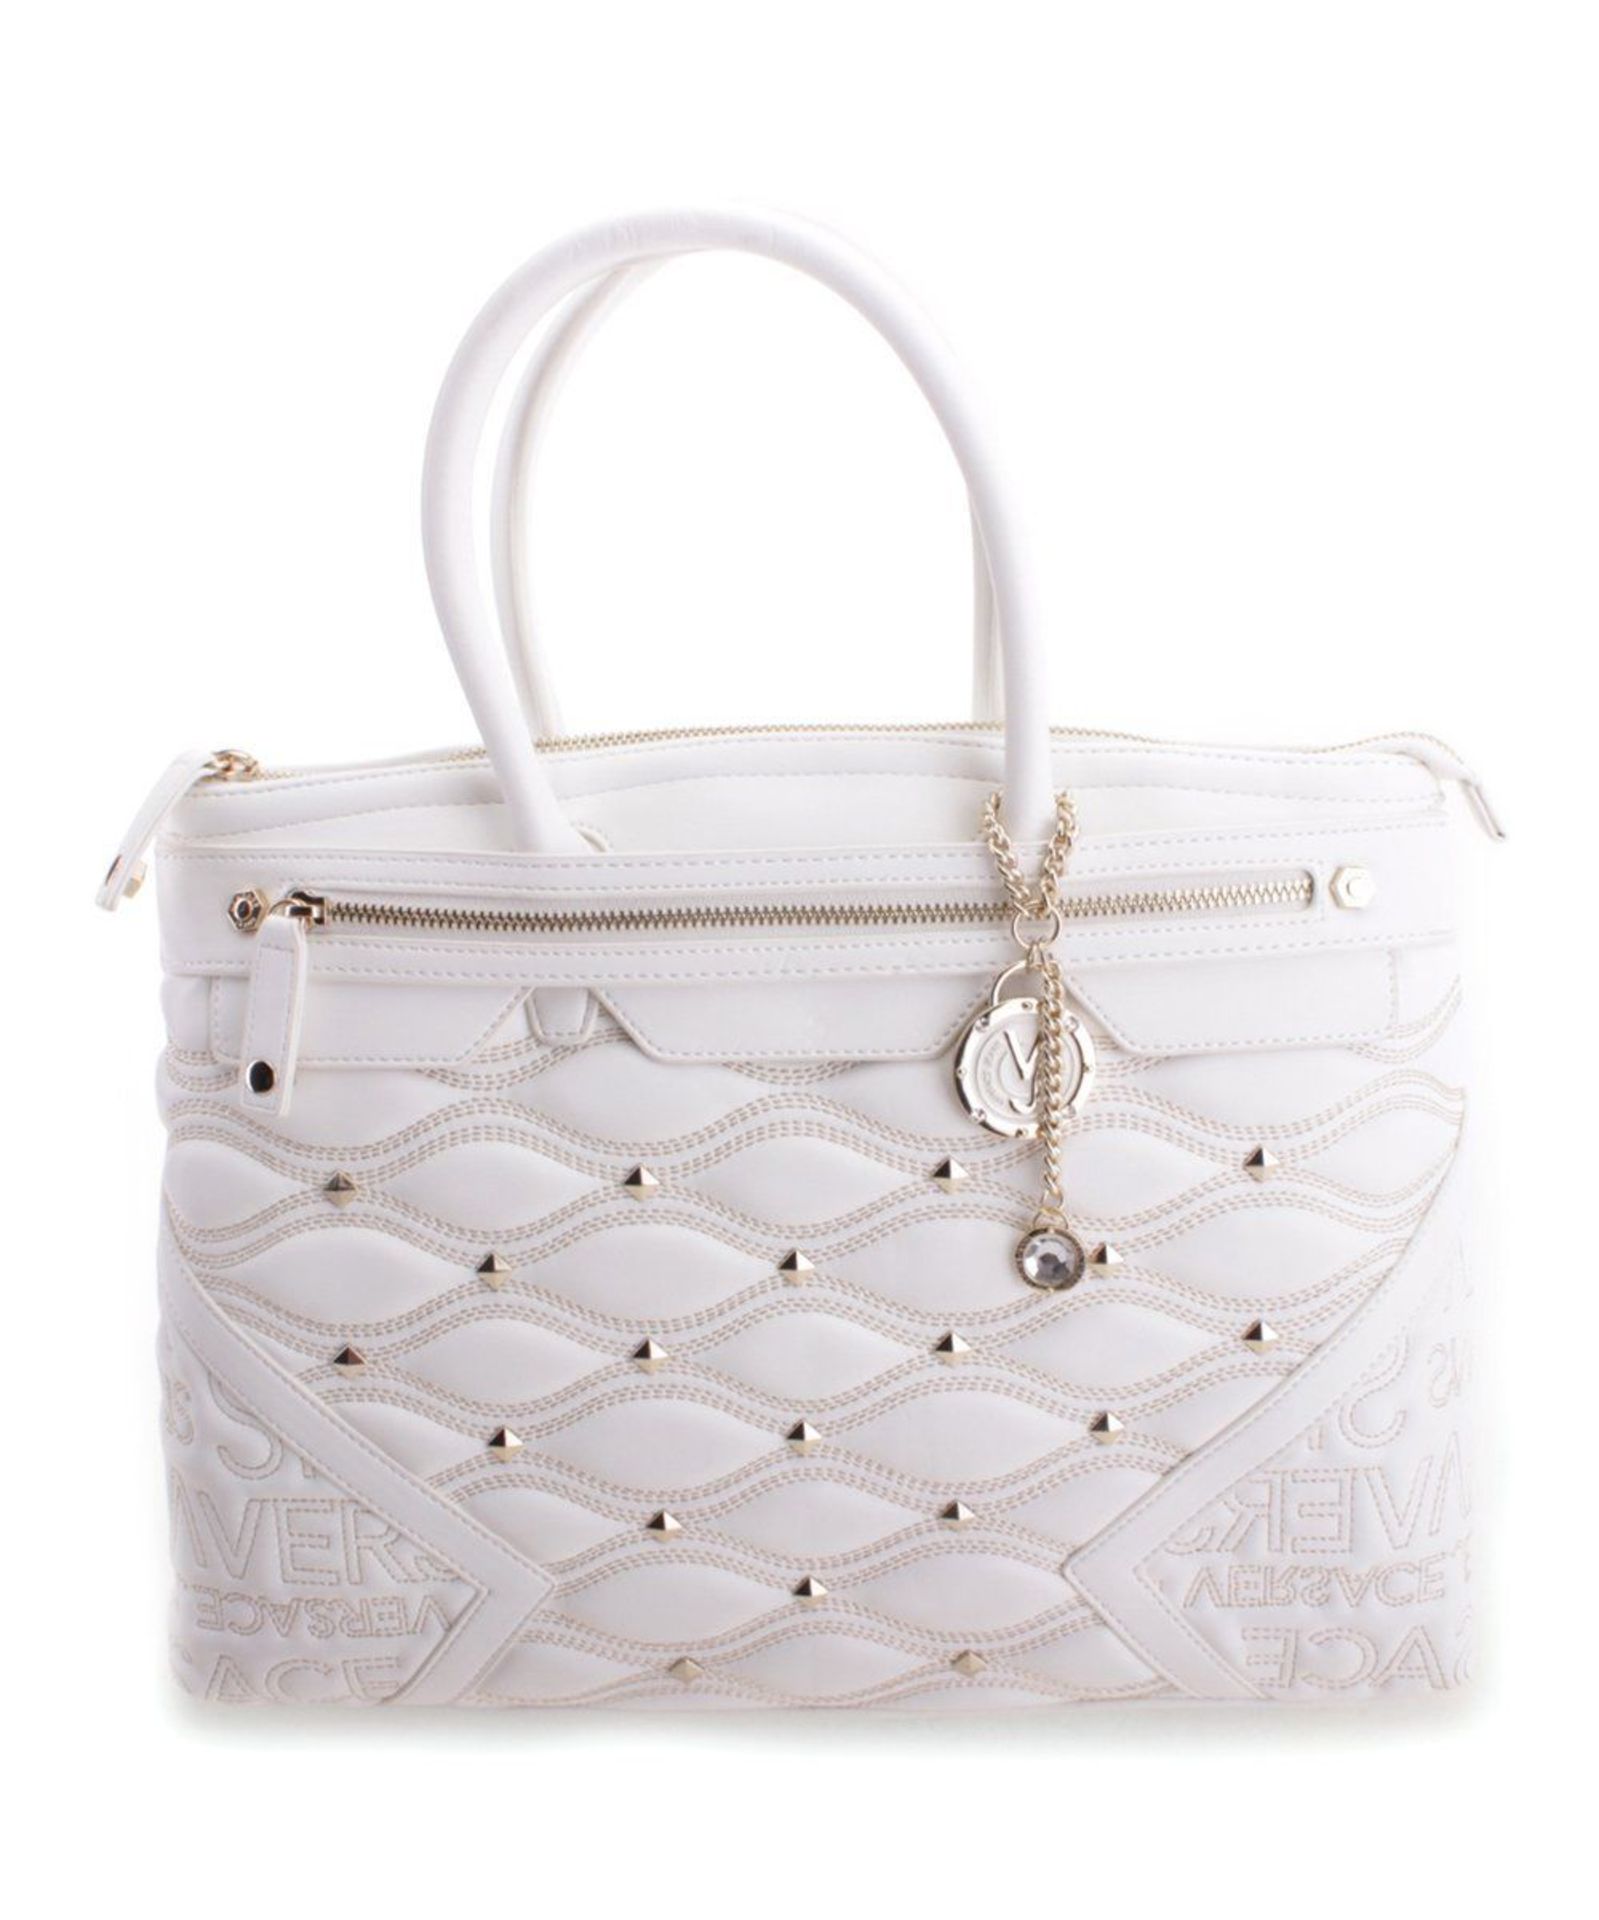 Versace Jeans Collection White & Goldtone Stud-Accent Quilted Tote (New With Tags) [Ref: 43256678-